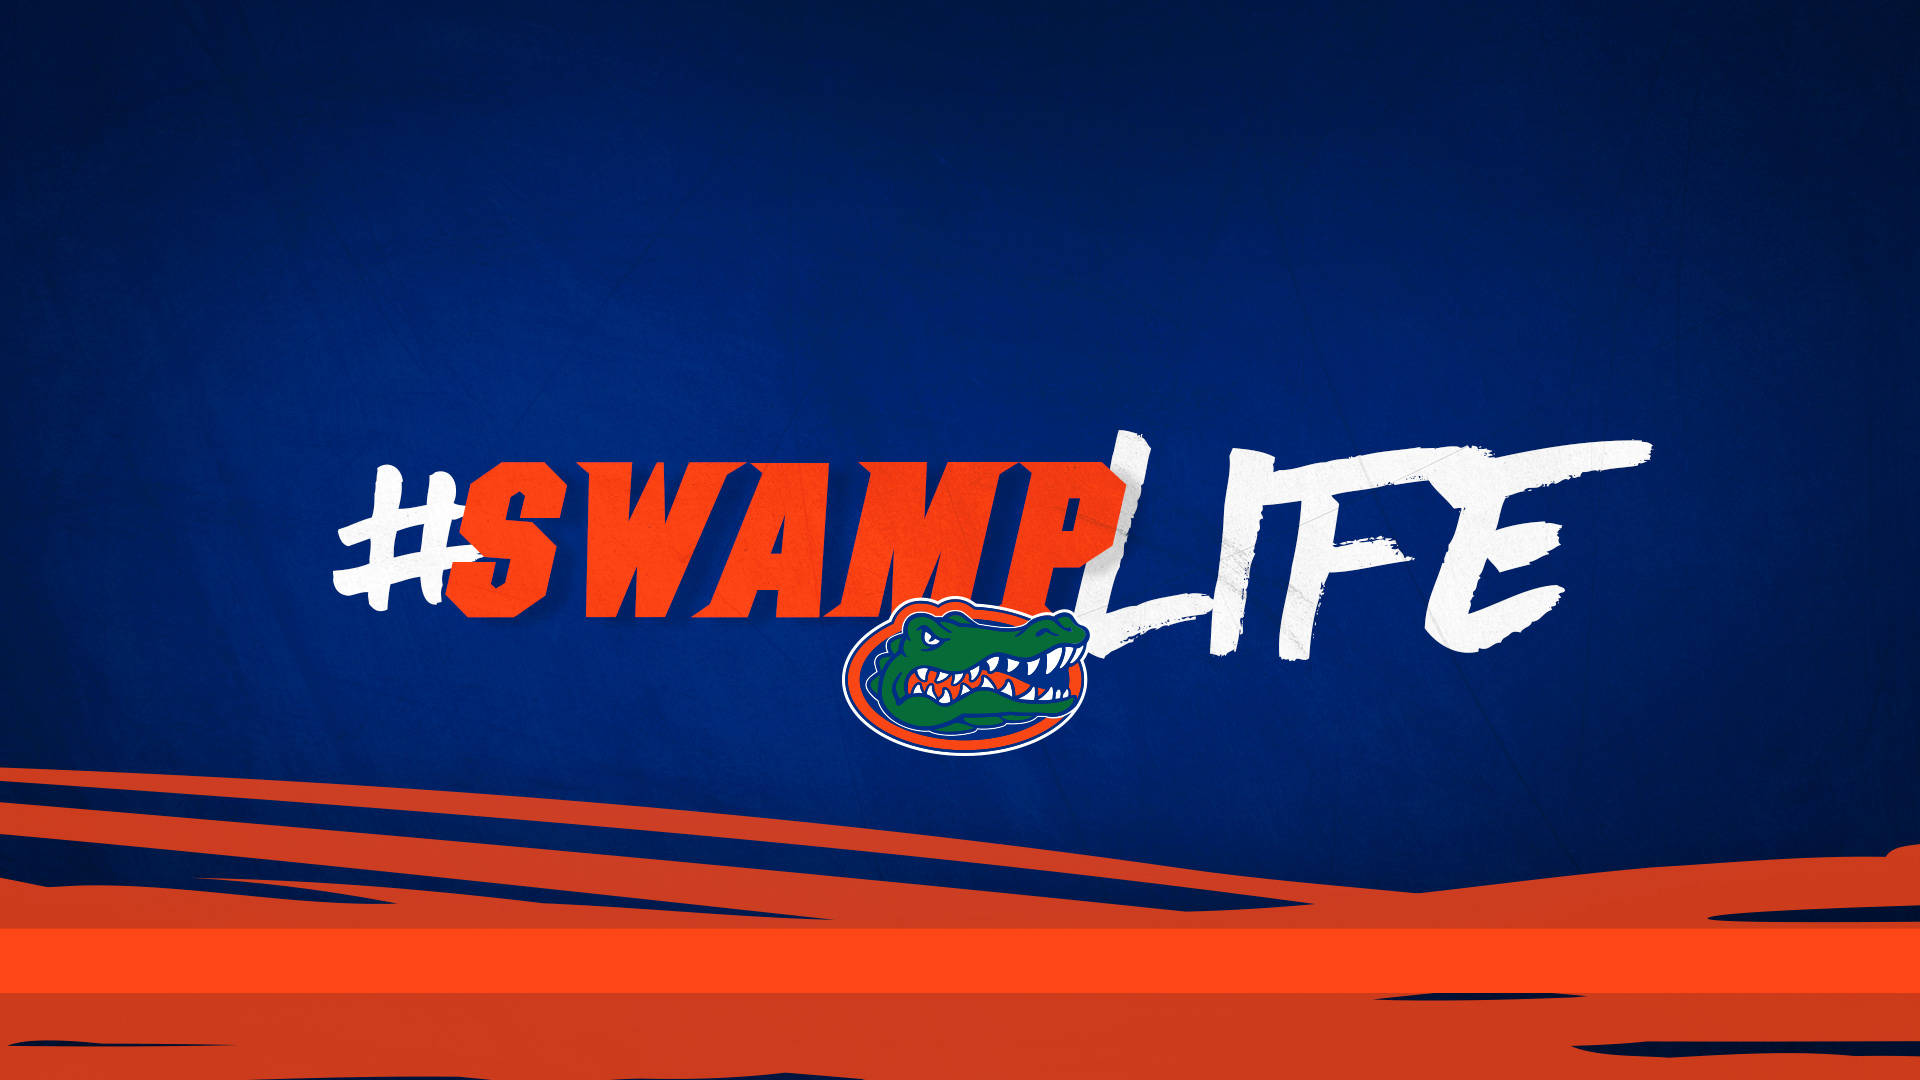 The energy in the Swamp, home of the passionate Florida Gators fans Wallpaper